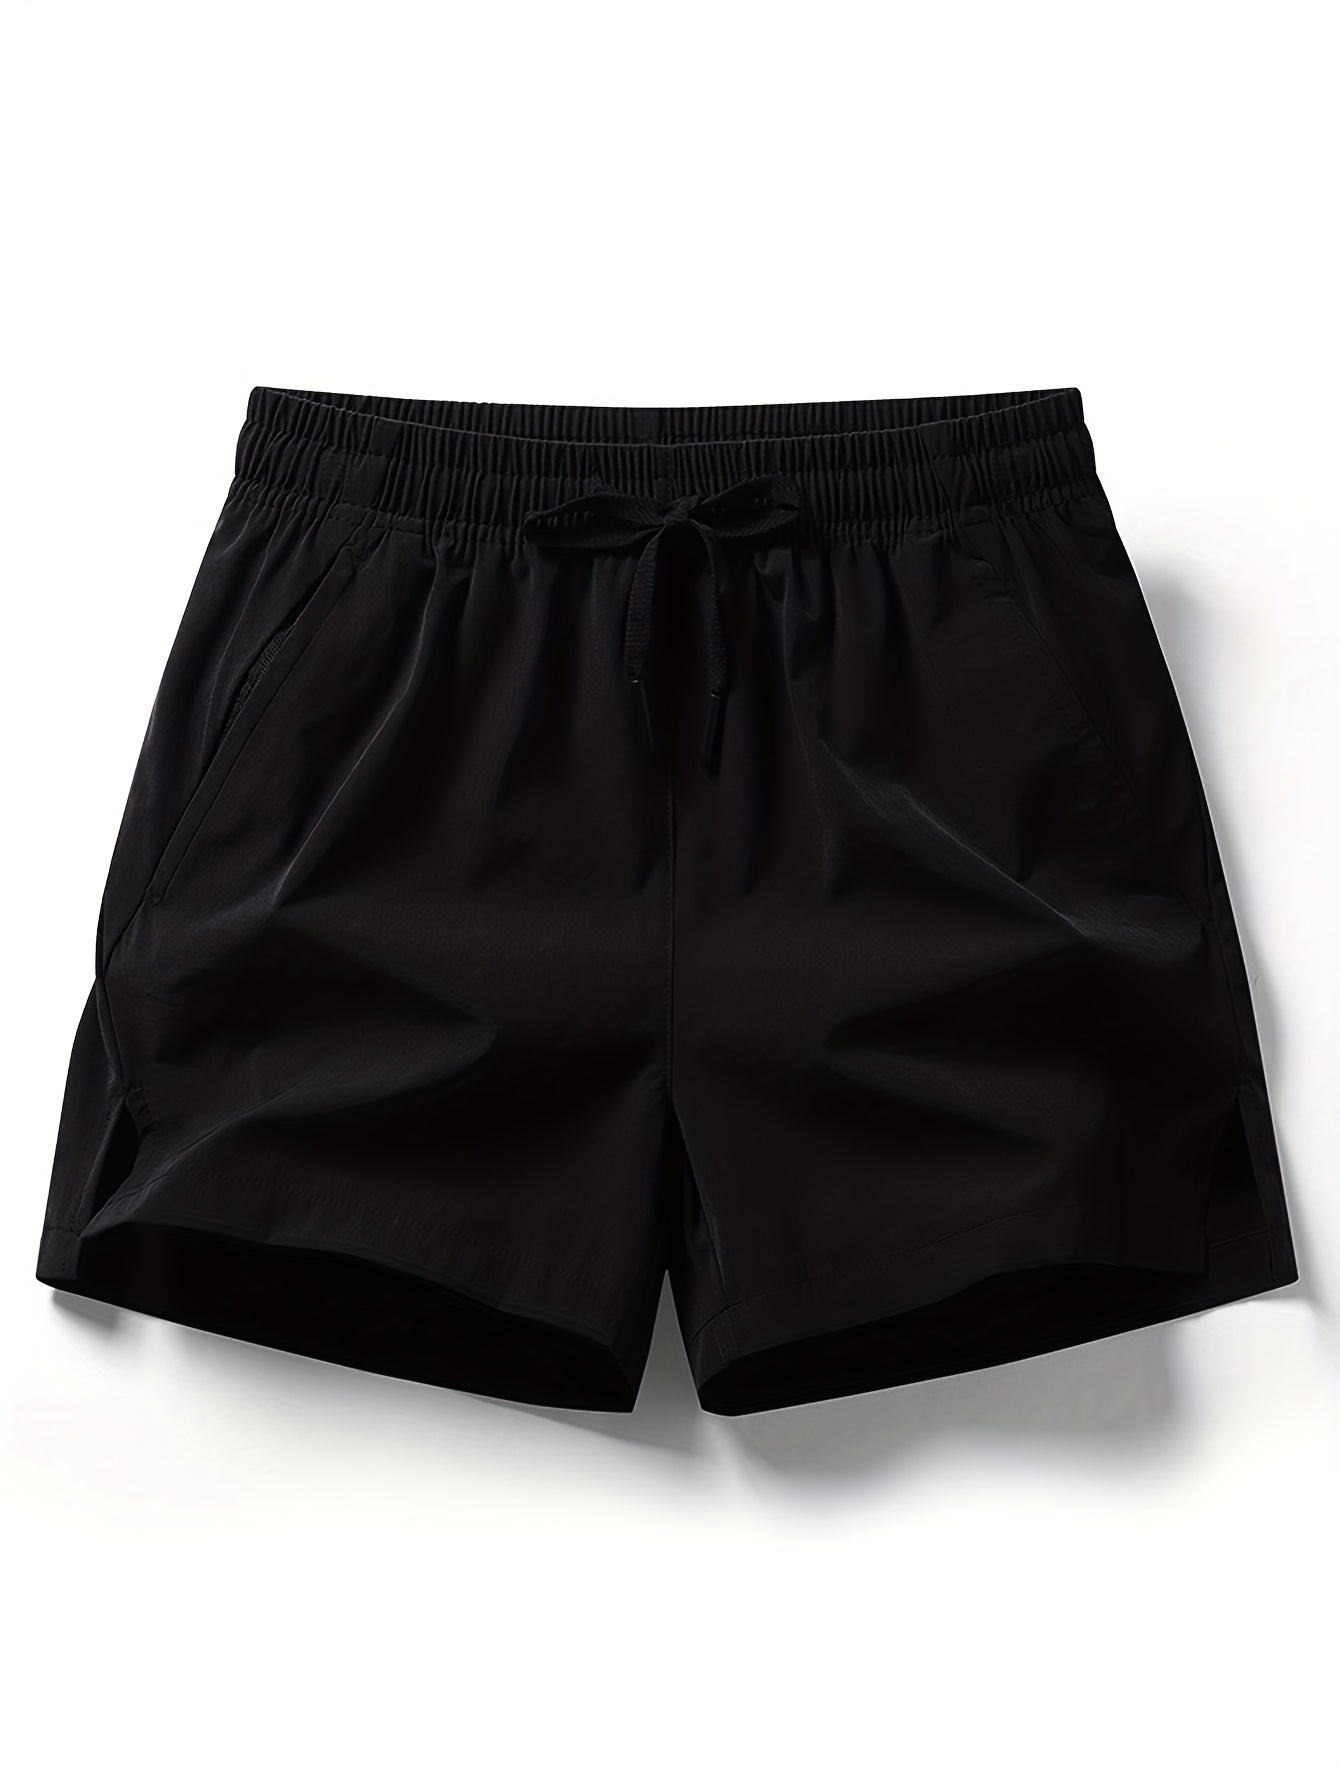 Breathable Men's Shorts with Pockets - Perfect for Running, Fitness, and Training